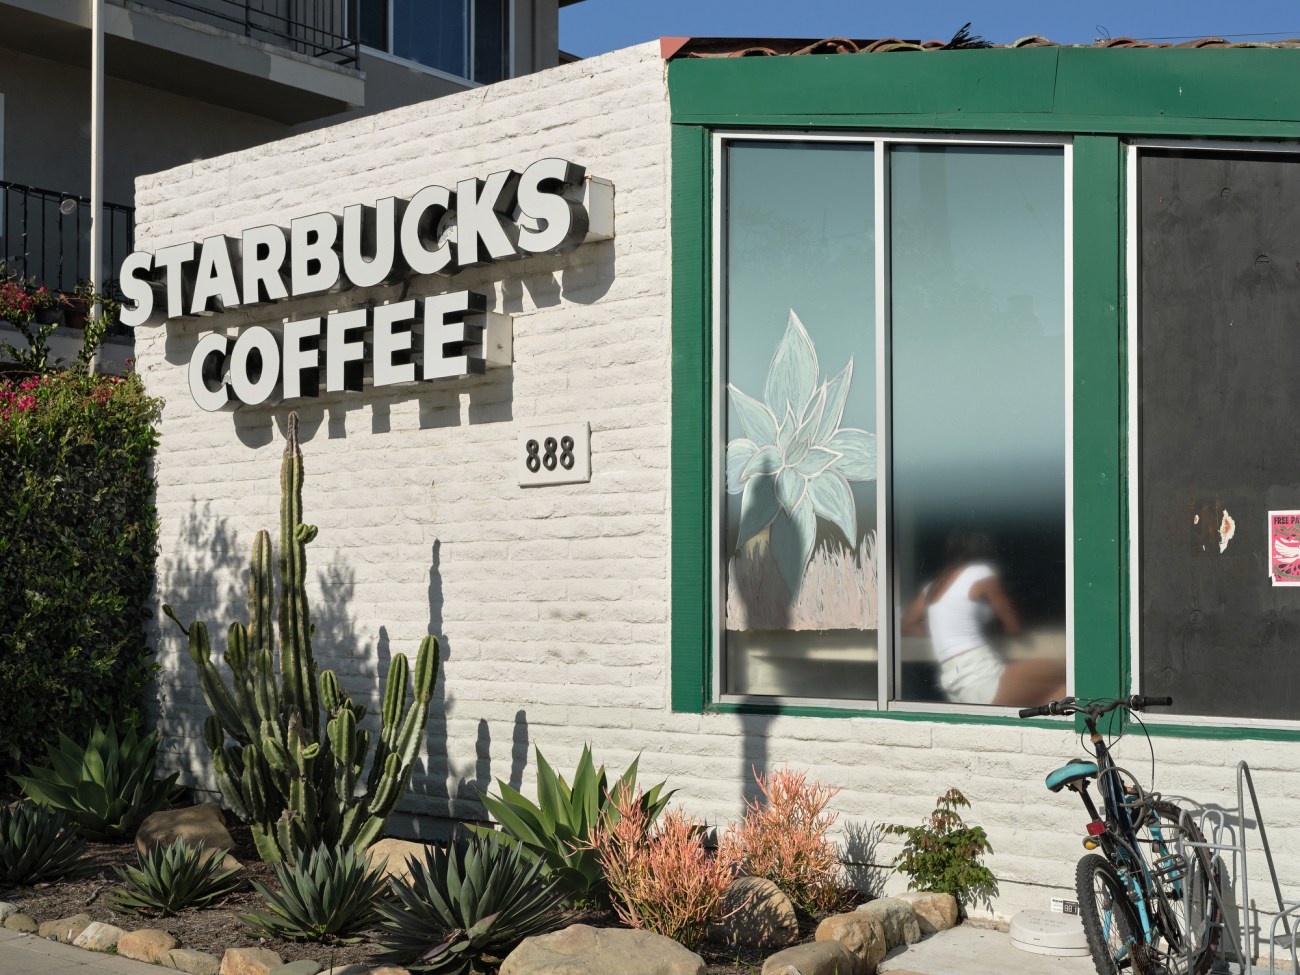 Exterior view of a Starbucks coffee shop with a person leaning against the window inside.